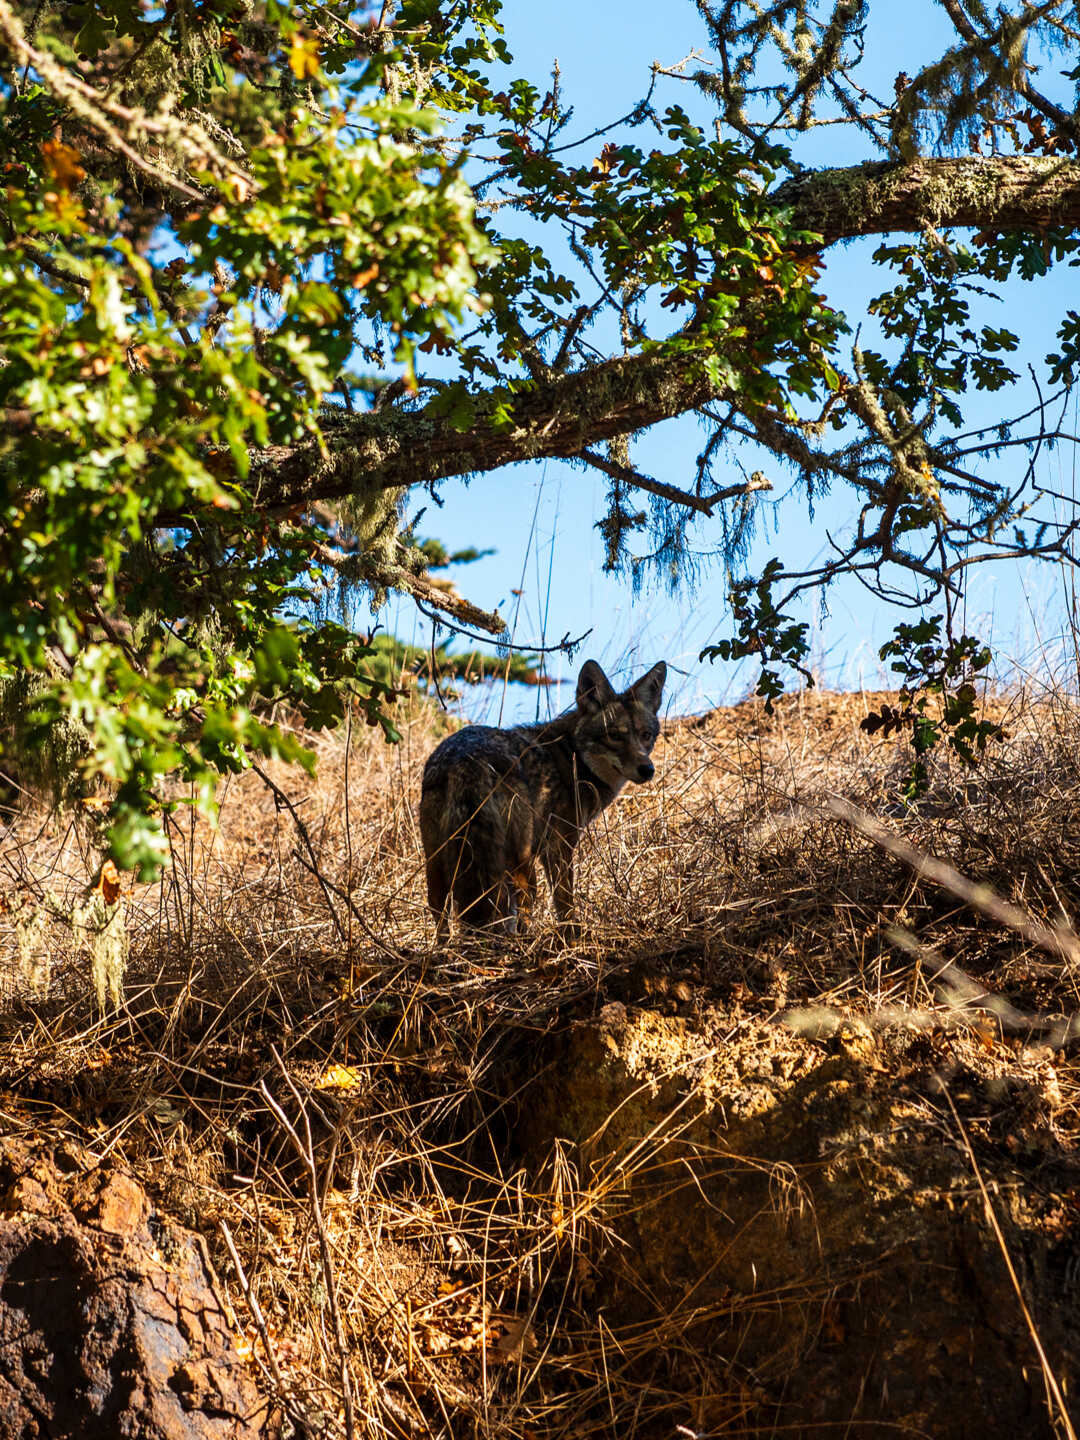 A coyote peers through the brush on Bernal Hill in San Francisco. Photo by Gayle Laird